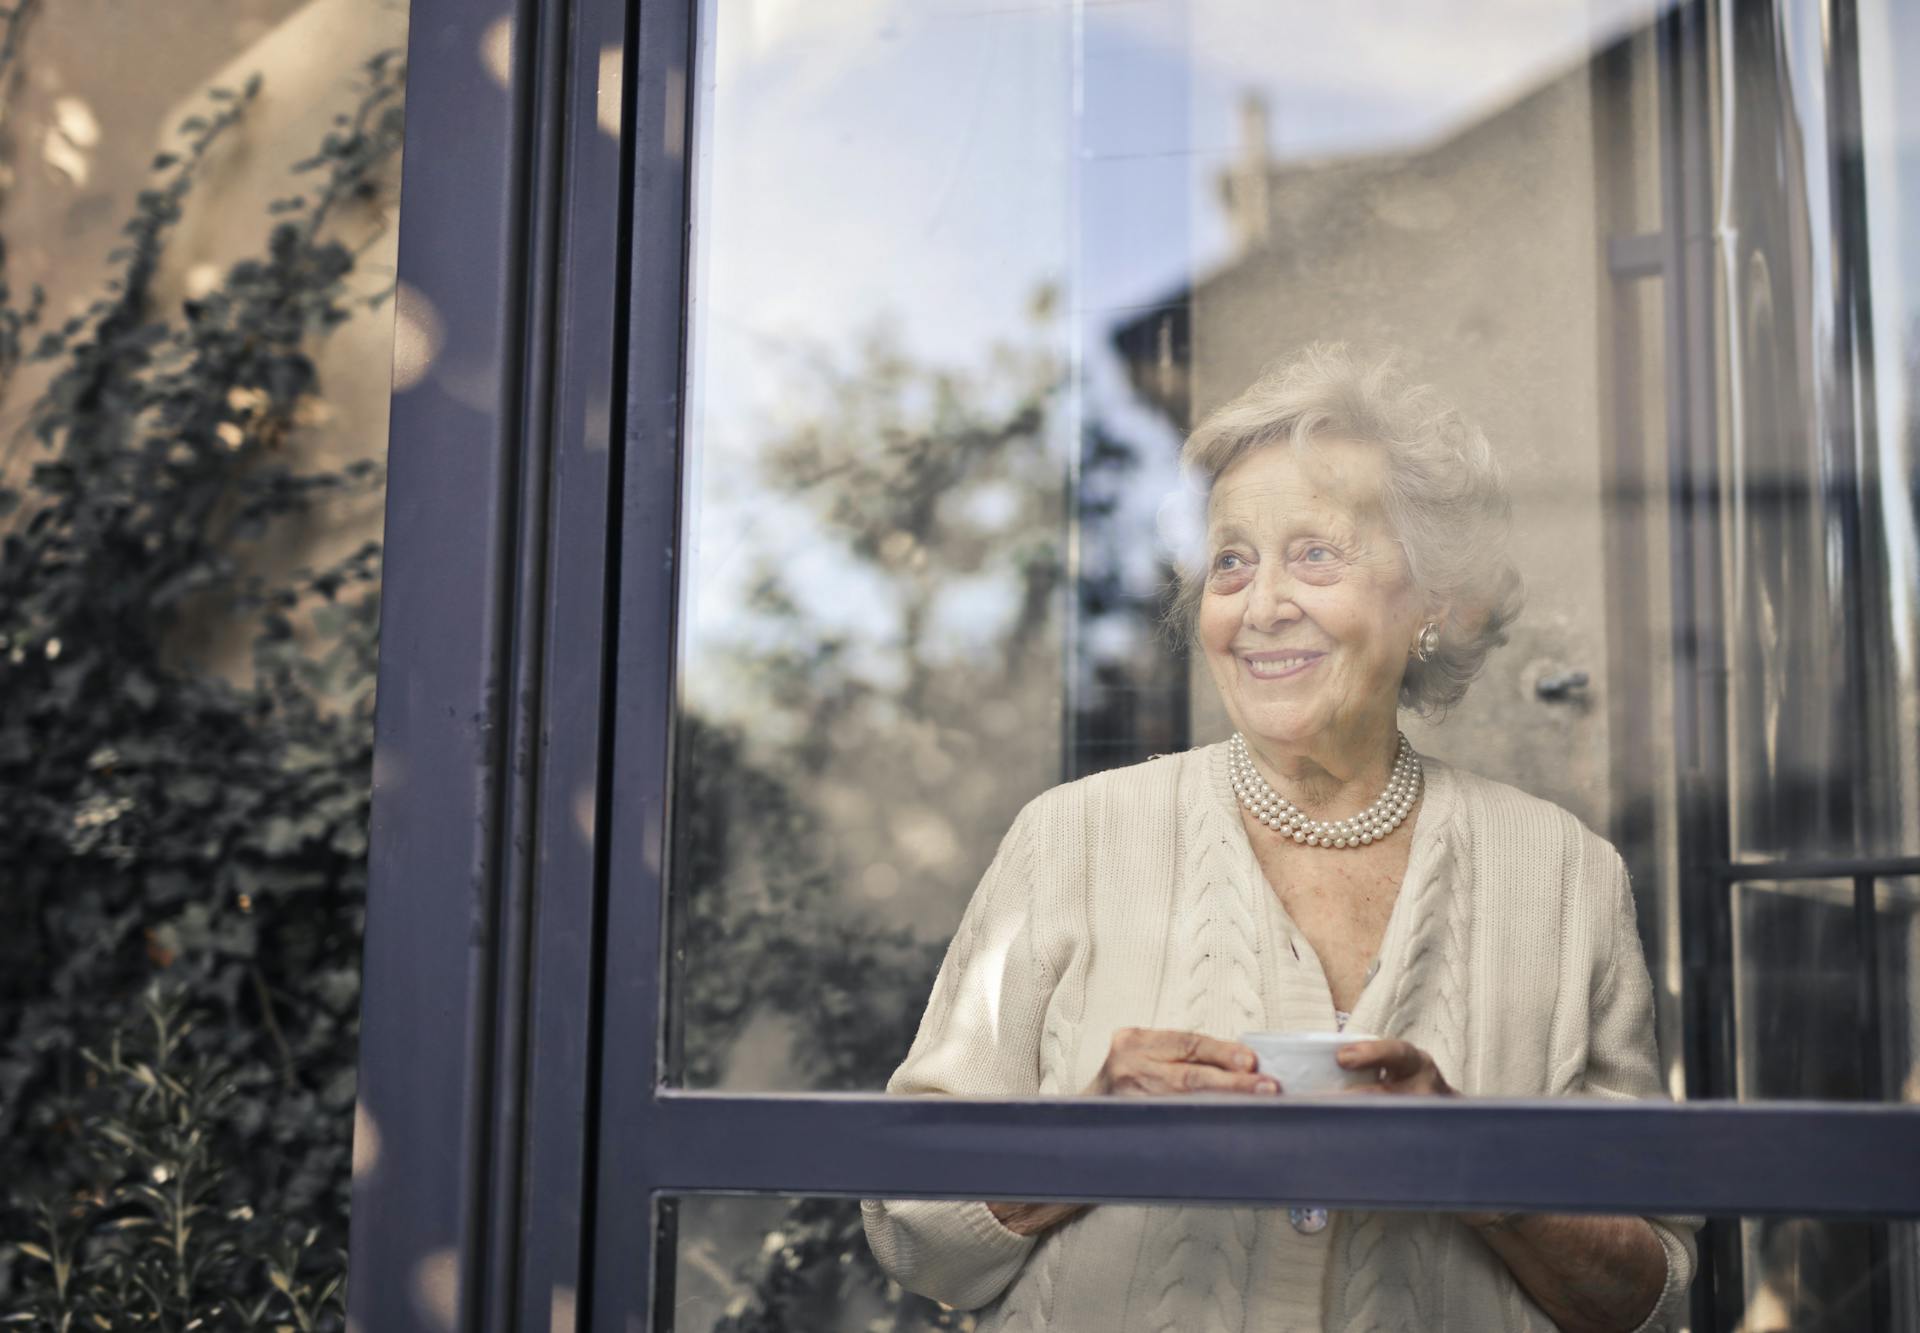 A smiling old woman |  Source: Pexels